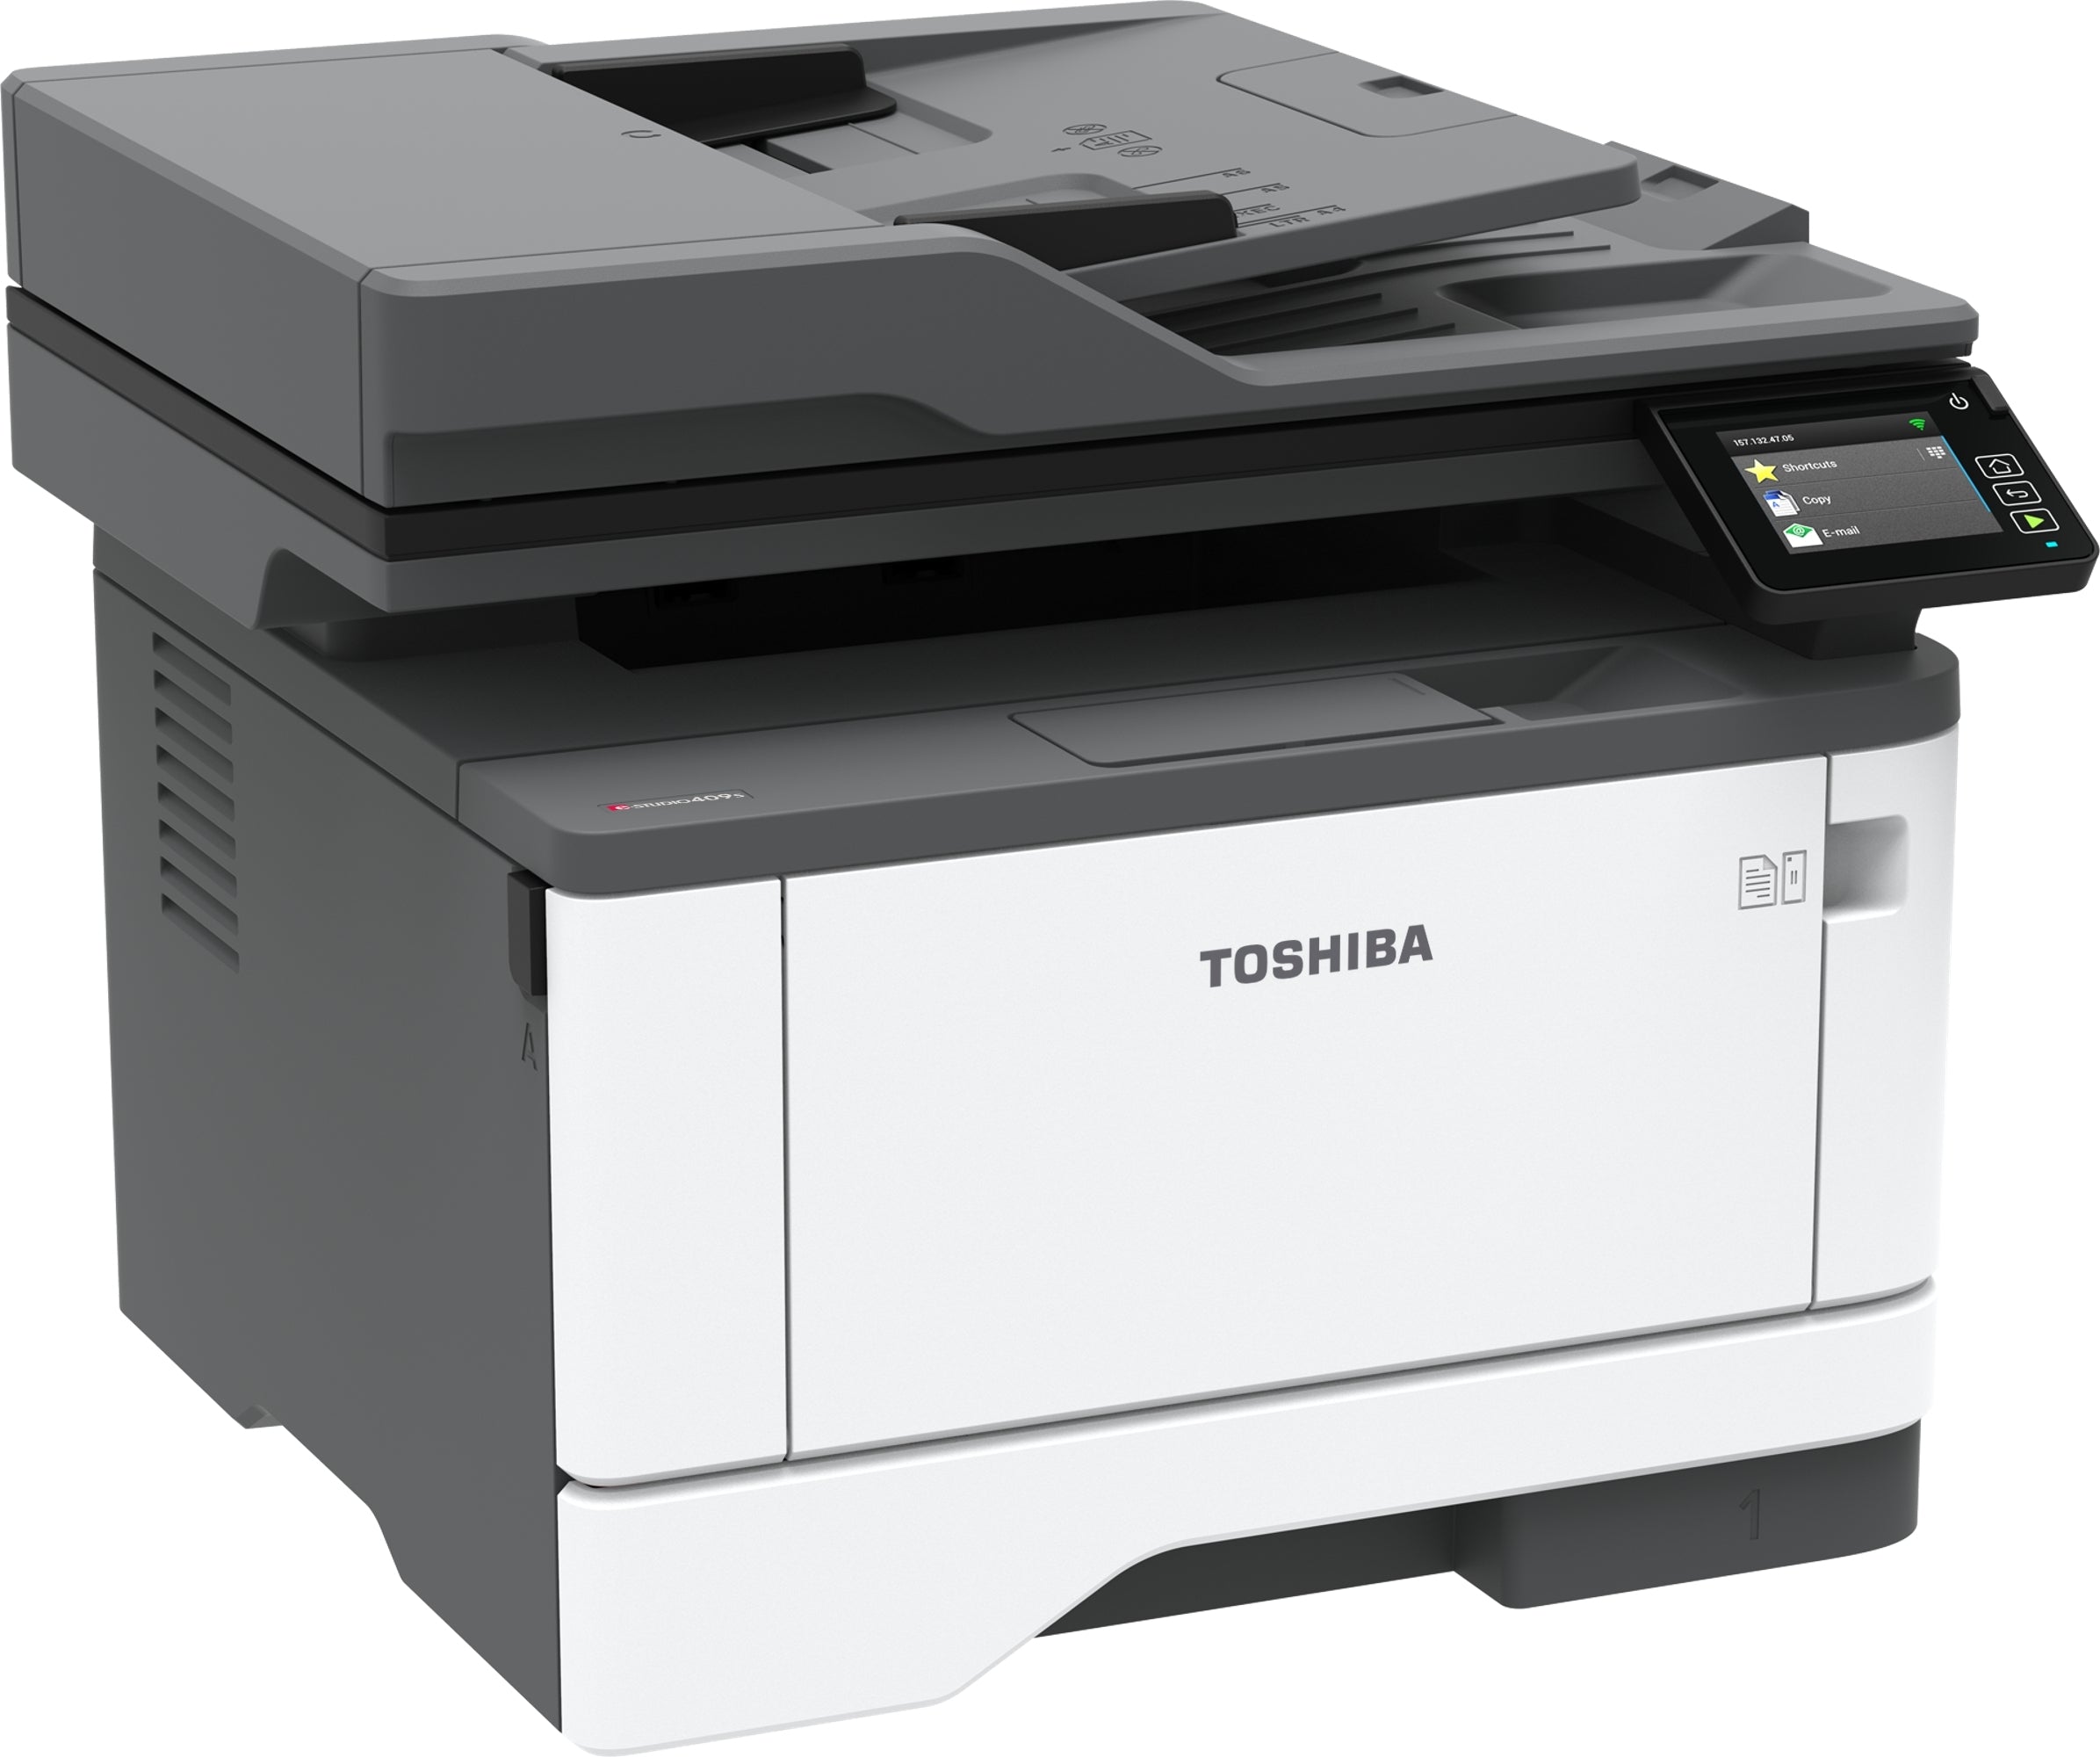 Toshiba E-Studio 409S Monochrome Printer Copier And Scanner With Speed Upto 42 PPM For Sale In Canada